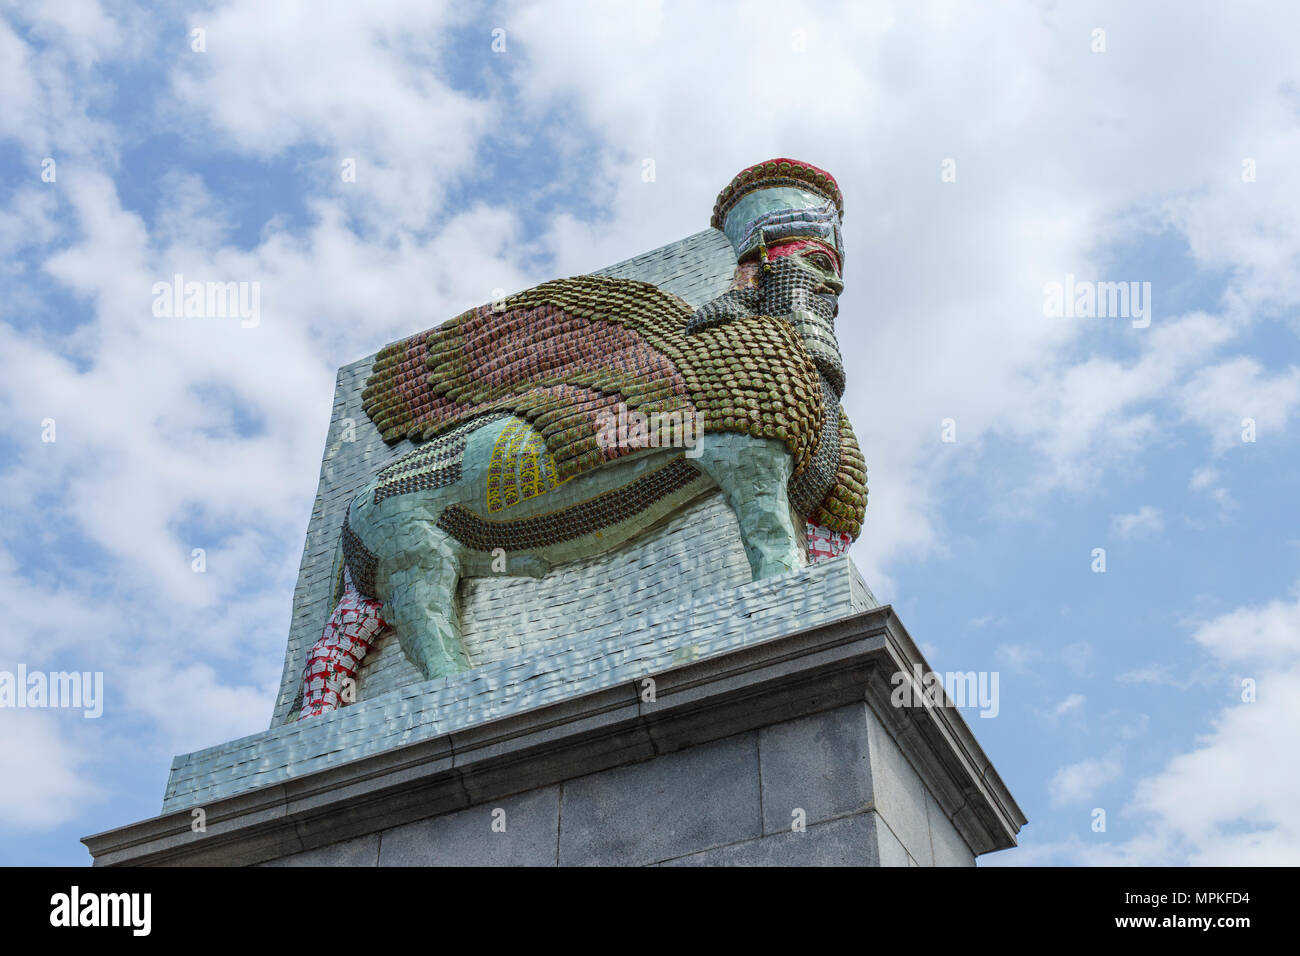 Assyrian Lamassu statue, The Invisible Enemy Should Not Exist, Fourth Plinth, Trafalgar Square, Charing Cross area, Westminster, central London WC2 Stock Photo